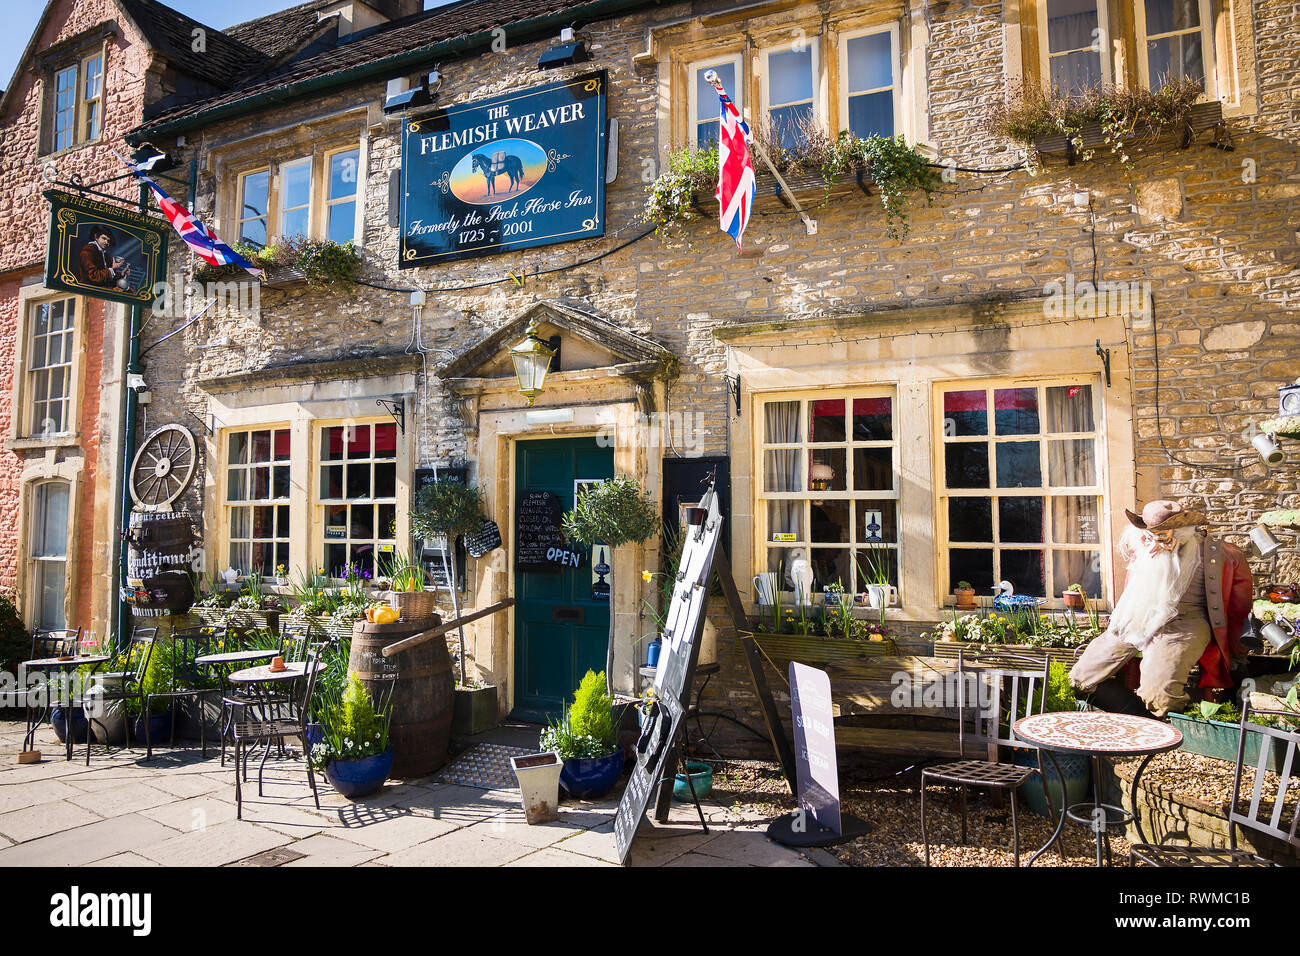 THE FLEMISH WEAVER formerly known as the Pack Horse Inn from 18th and 19th centuries in Corsham Wiltshire England UK Stock Photo